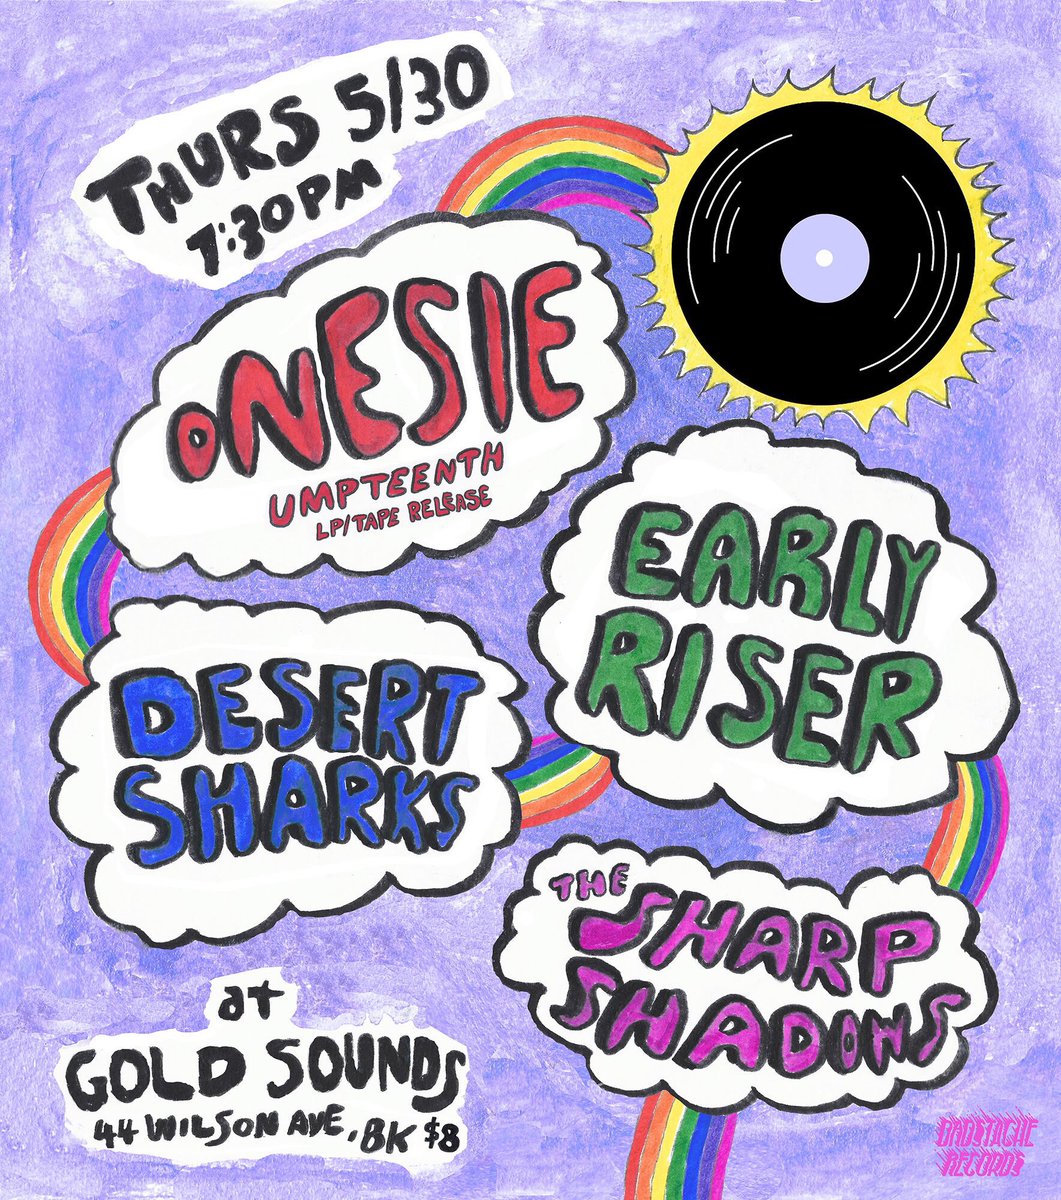 Follow the freakin’ 🌈 to the Umpteenth LP/tape release show Thurs 5/30 at @goldsoundsbar w/ @earlyriserband @Desert_Sharks and @TheSharpShadows @DadstacheRecs #tastetherainbow  #recordrelease #markyourcalendars #excited